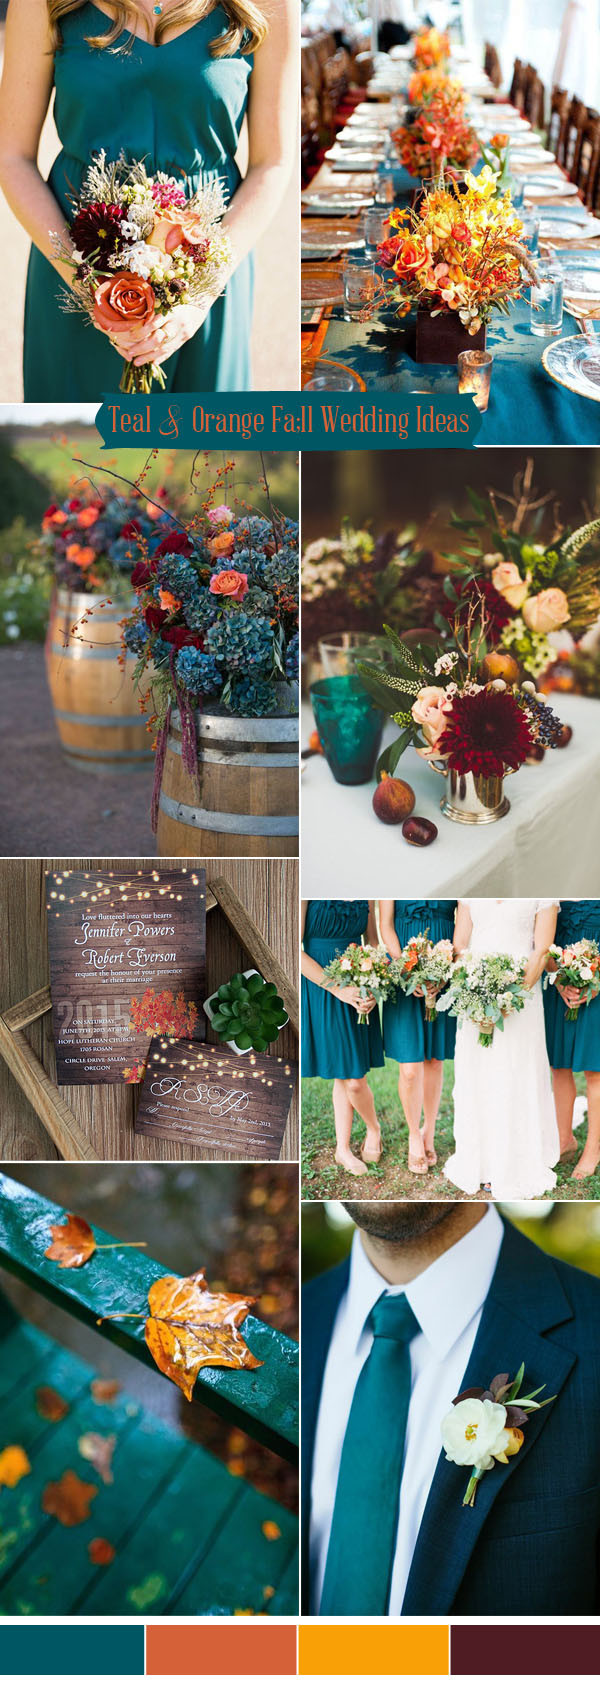 Wedding Color Schemes For Fall
 Ten Prettiest Shades of Blue for 2017 Wedding Color Ideas